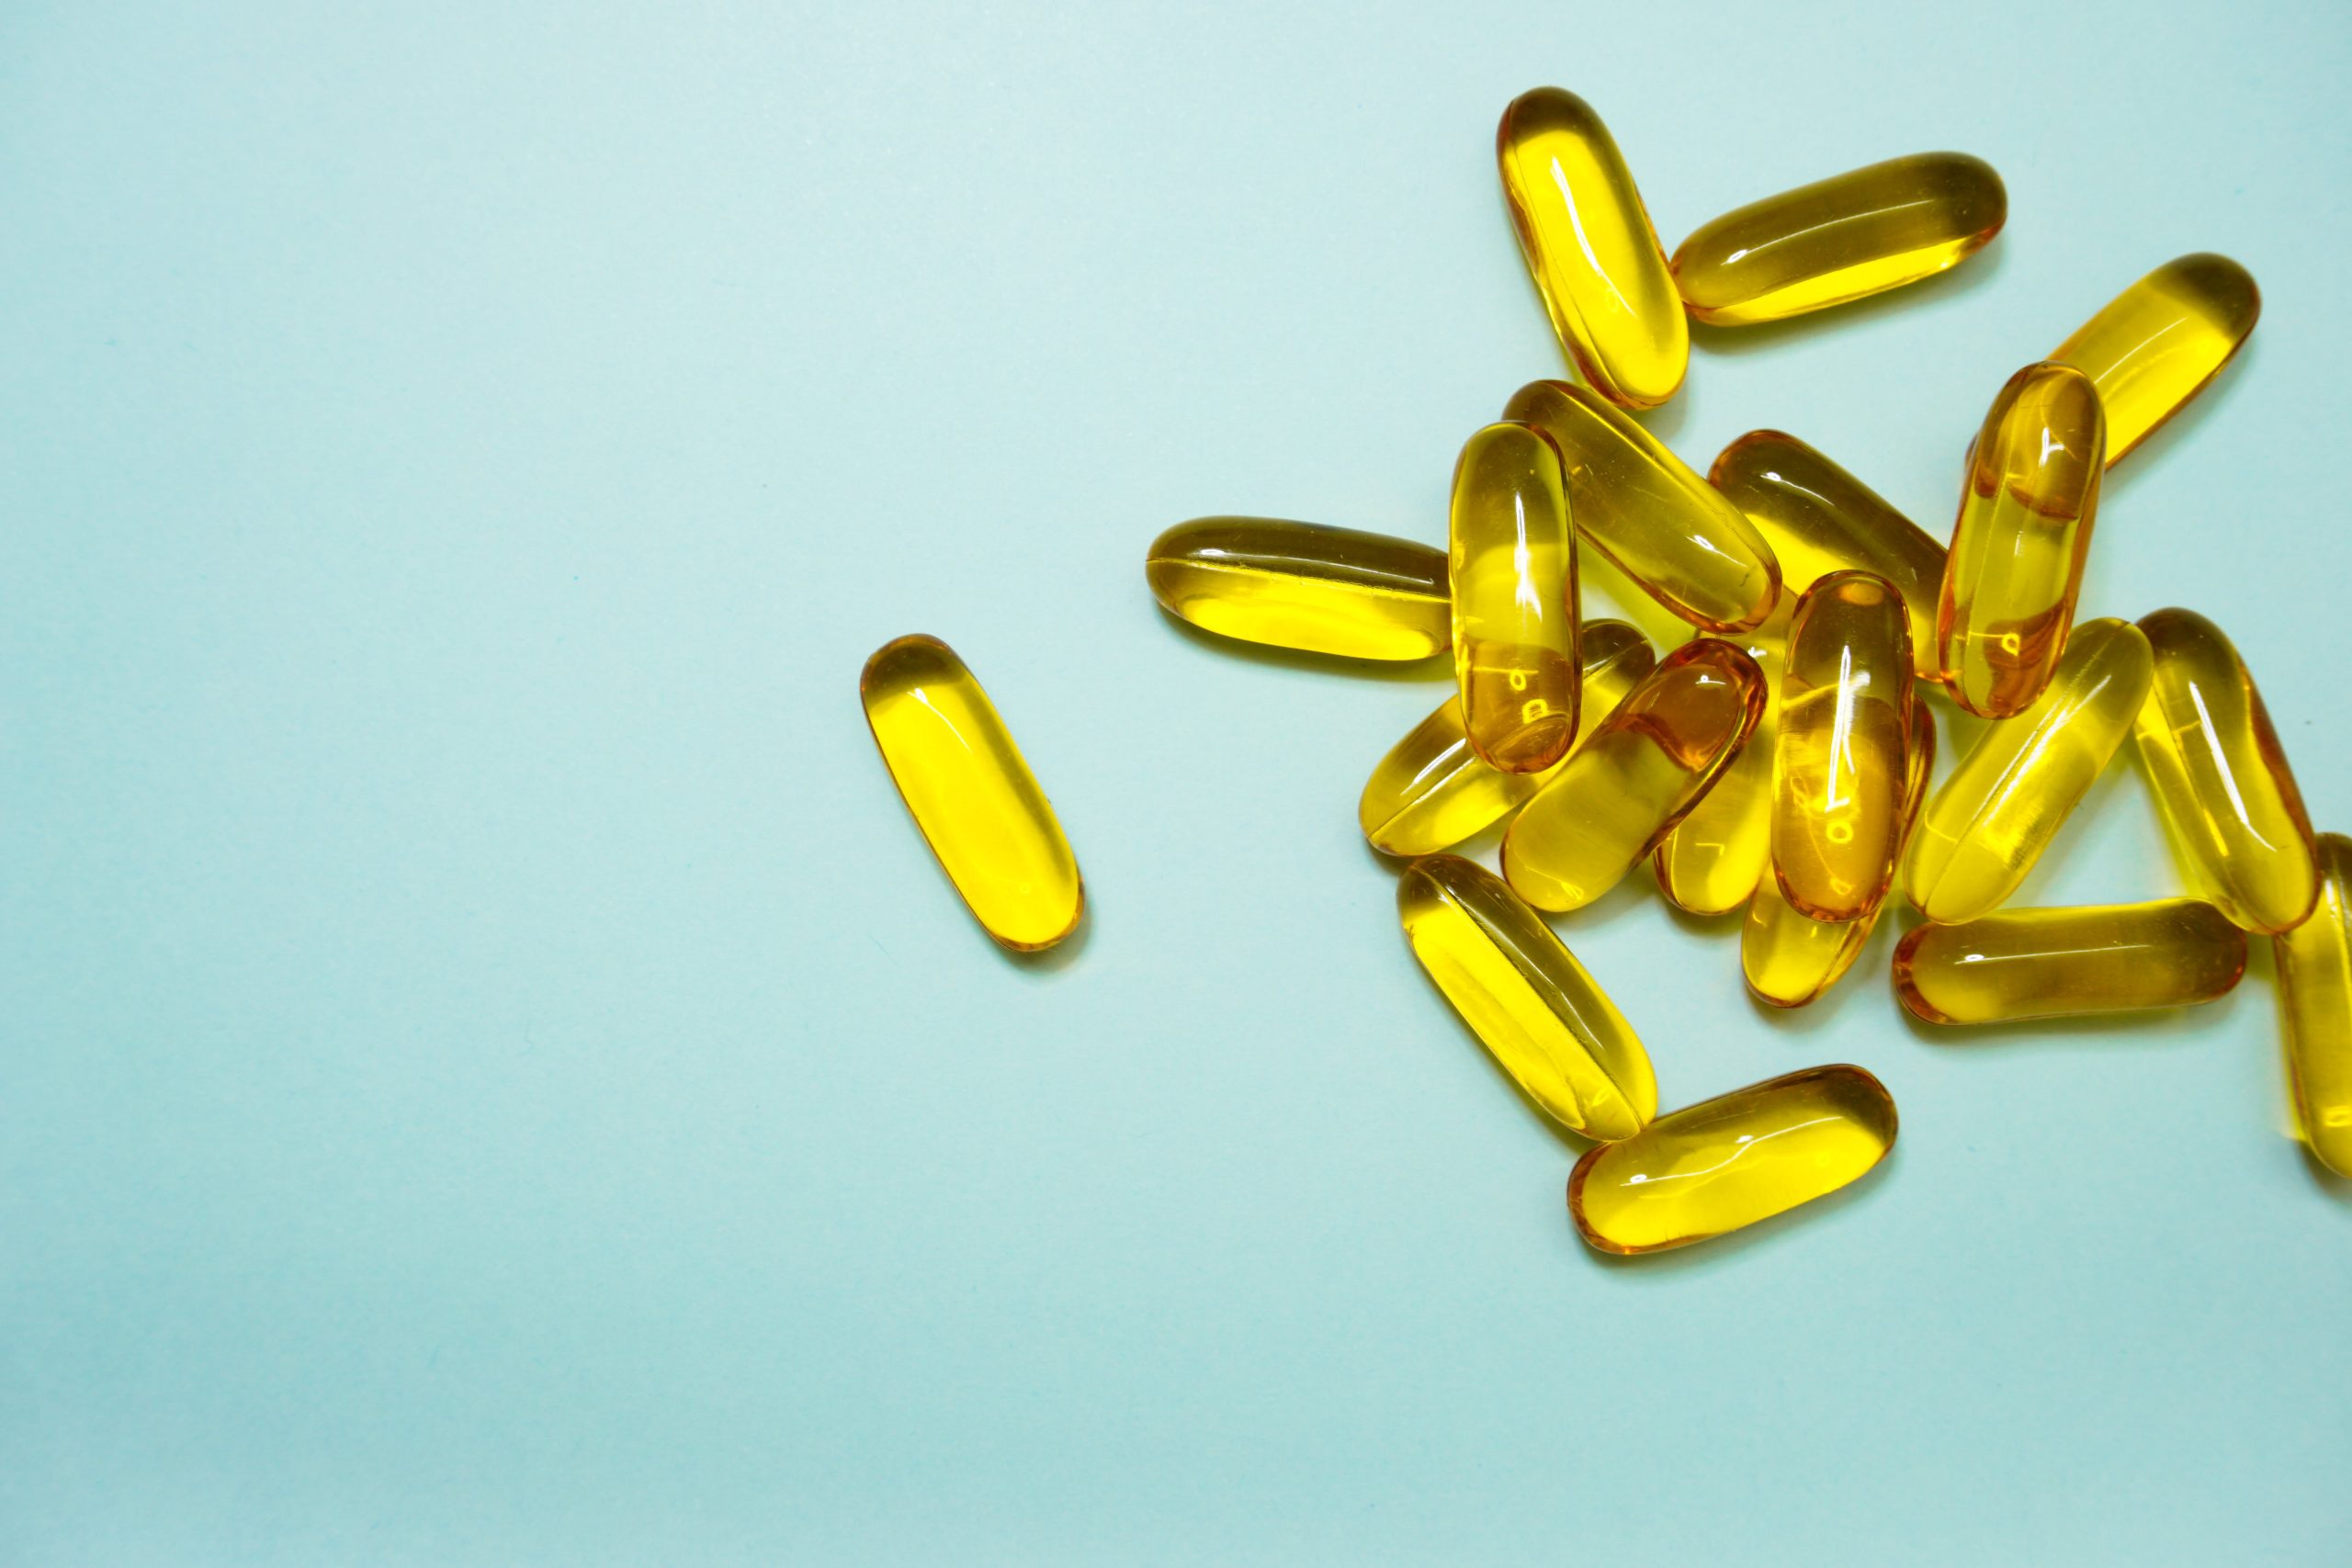 How to Choose the Right Supplements for Your Needs